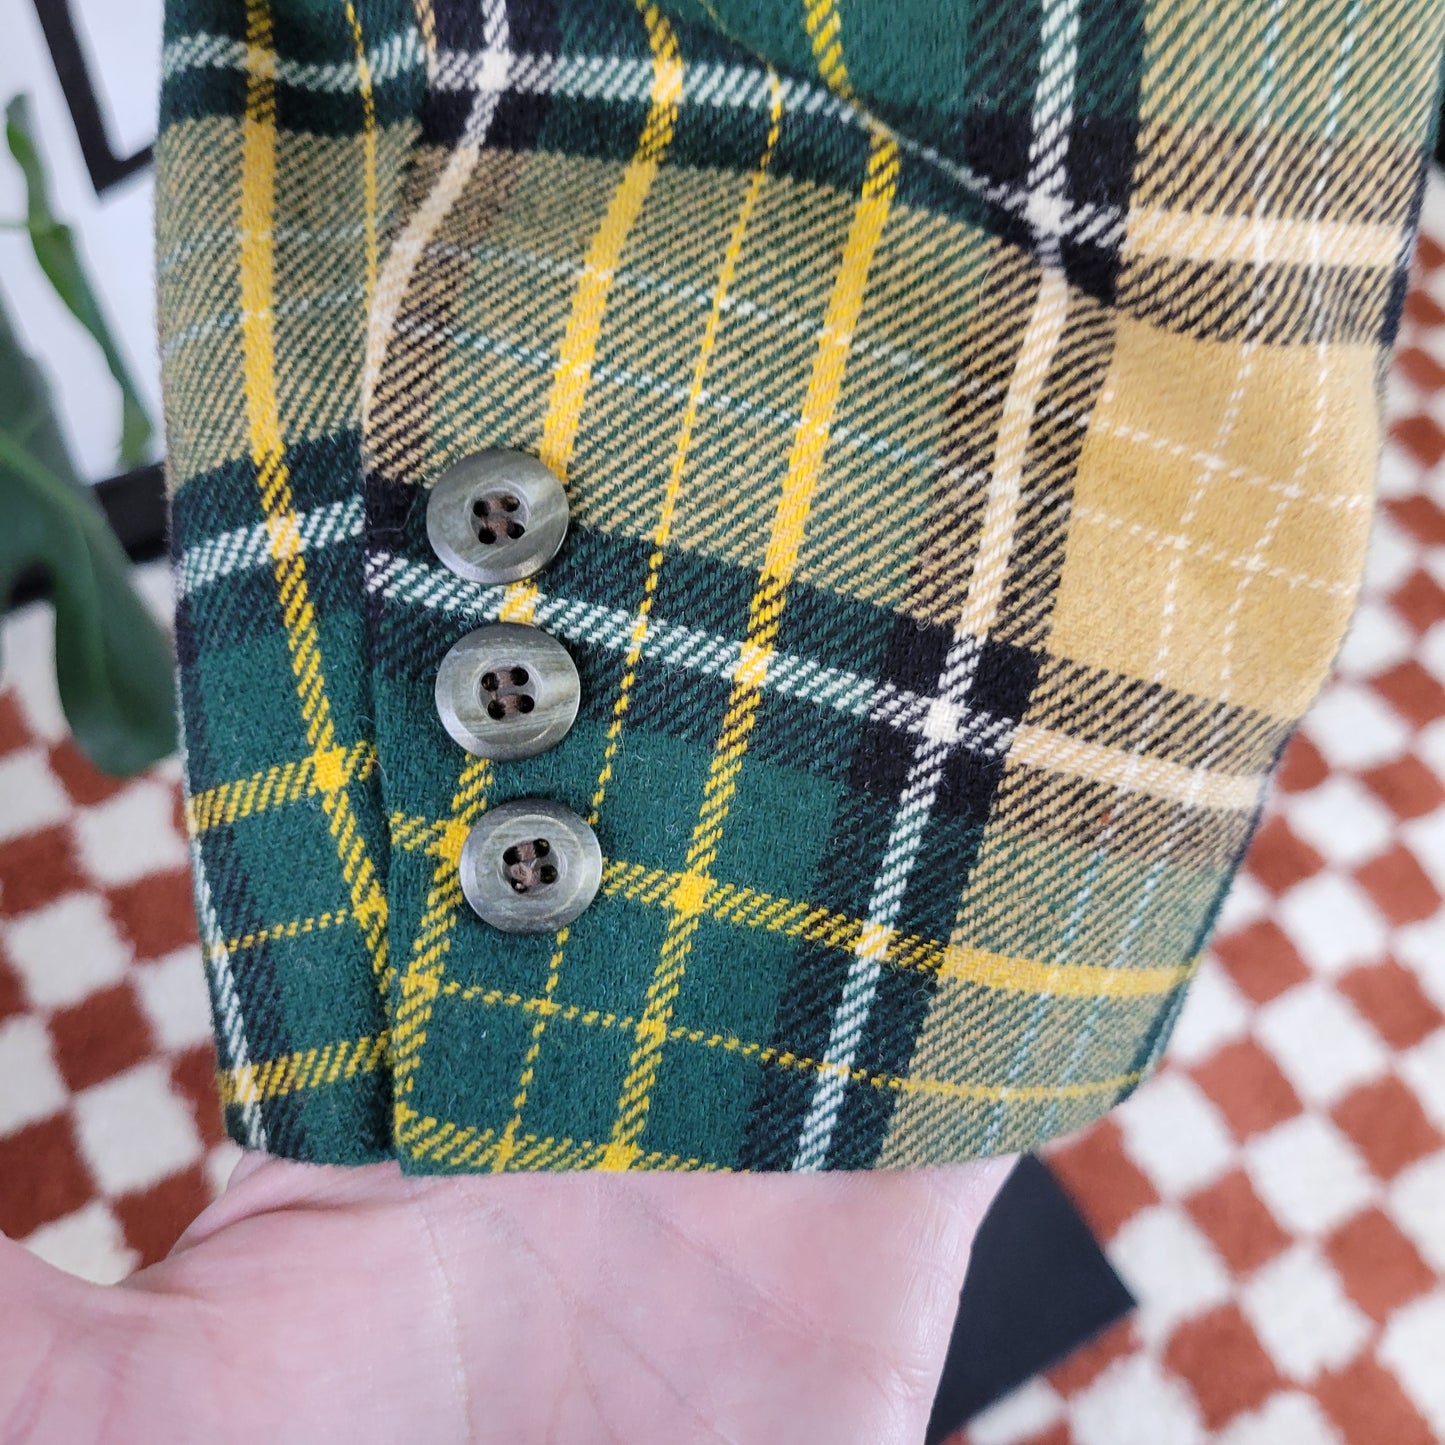 Vintage 70s Hand Tailored Yellow and Green Plaid Wool Tweed Blazer - large